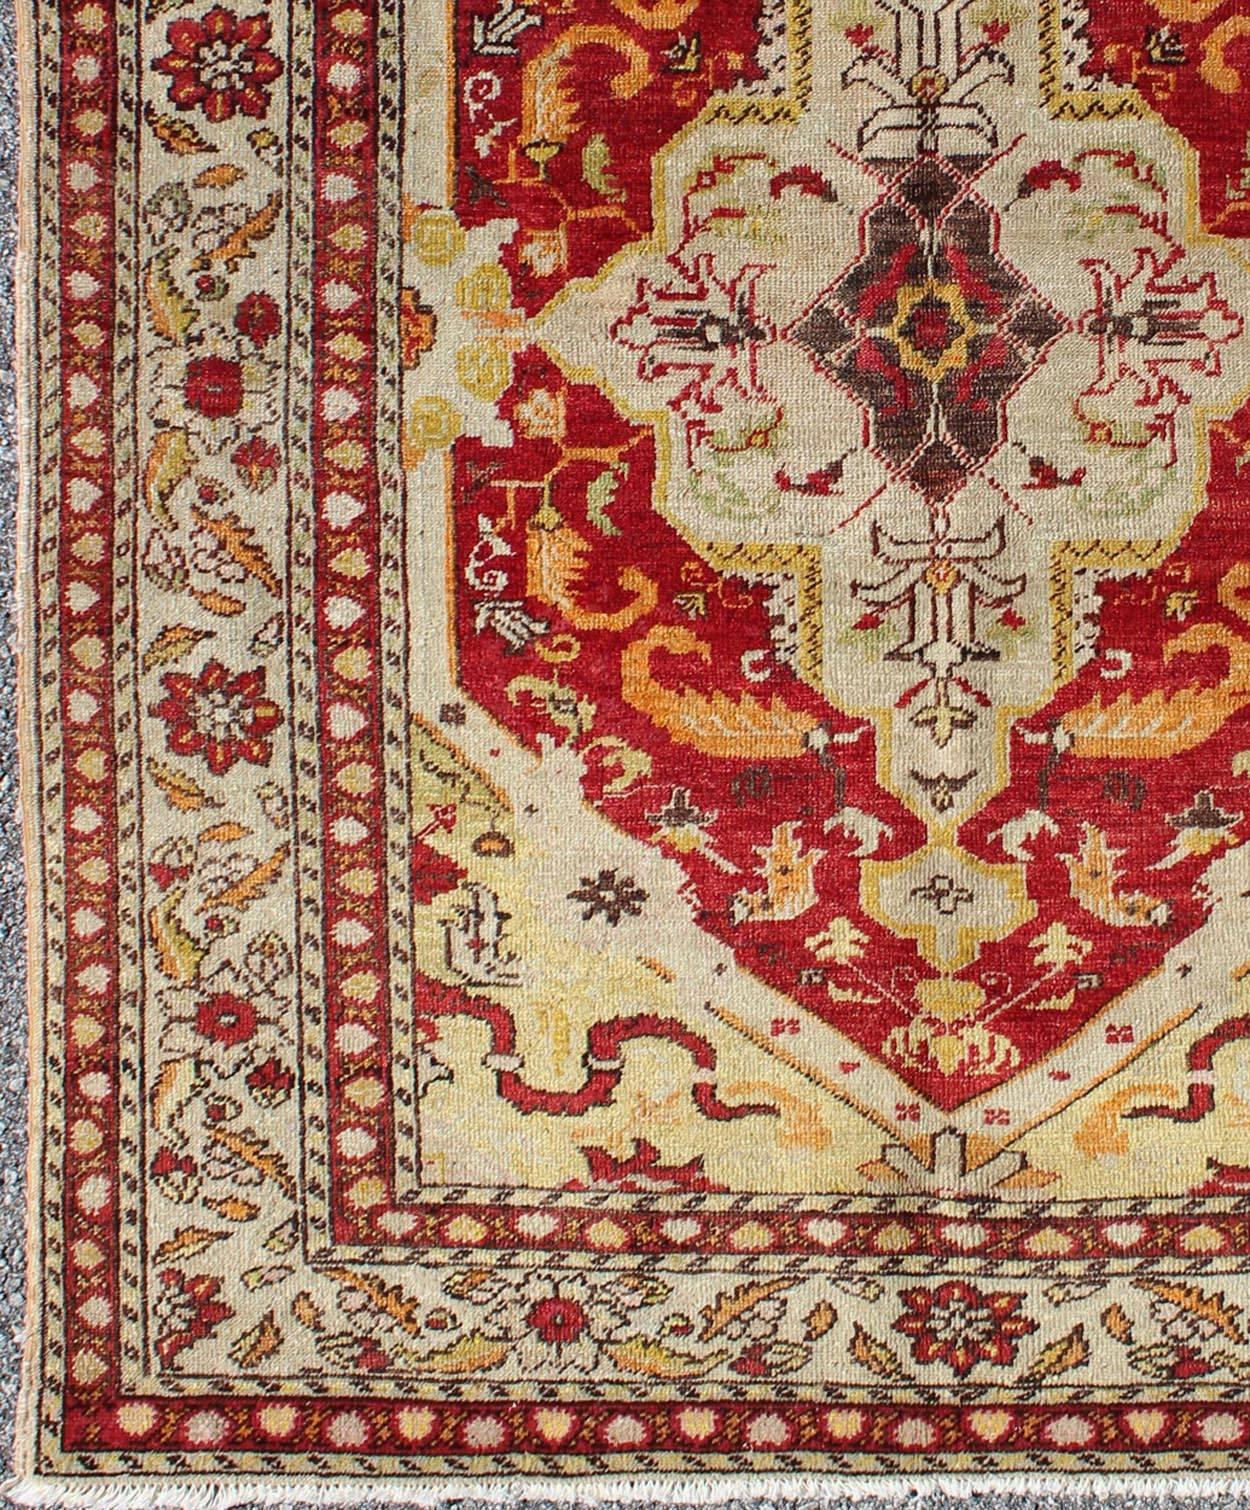 Antique Turkish Fine Sivas rug with center  medallion in Red, yellow & Light Green. Keivan Woven Arts/ rug E-1101, country of origin / type: Turkey / Oushak, circa 1910

Measures: 3'10 x 5'1.

This antique early 20th century Sivas fine rug features